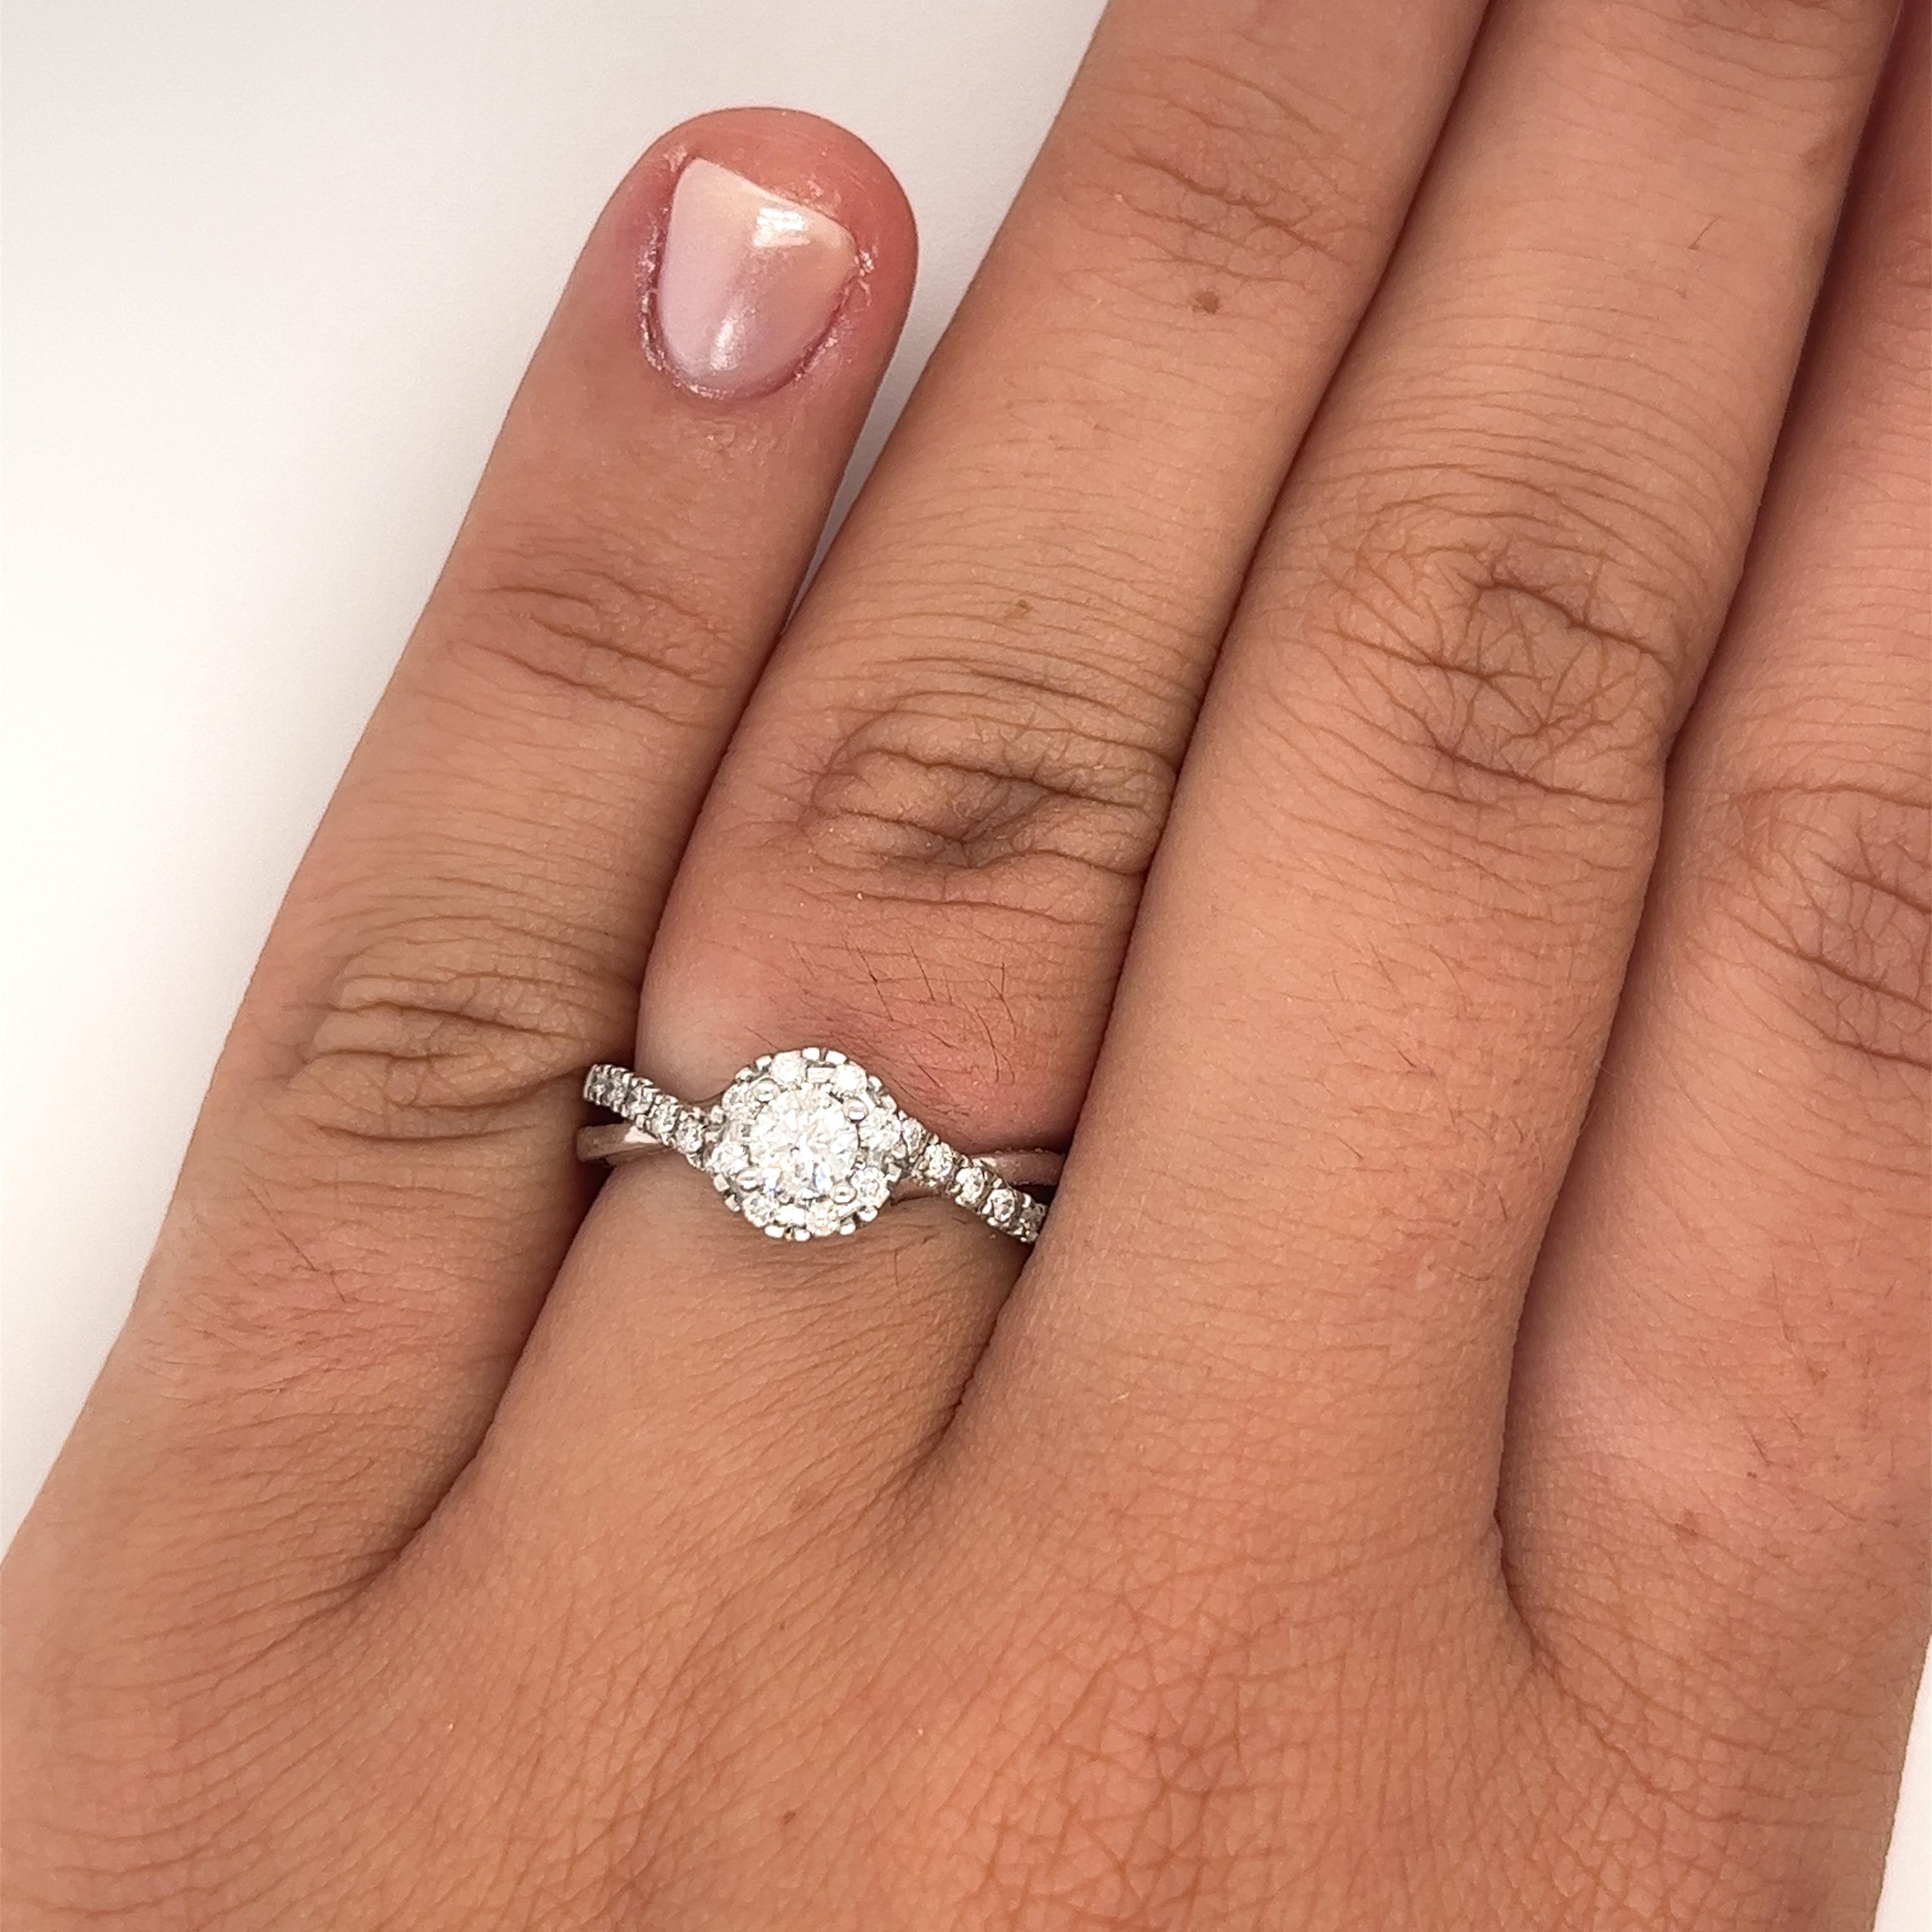 10K white gold natural diamond engagement ring. Featuring a 0.25 carat round cut diamond center stone, with G color and SI2 clarity. Adorned with a diamond halo and diamond side stones with a total 0.66-carat weight. All securely held with prong